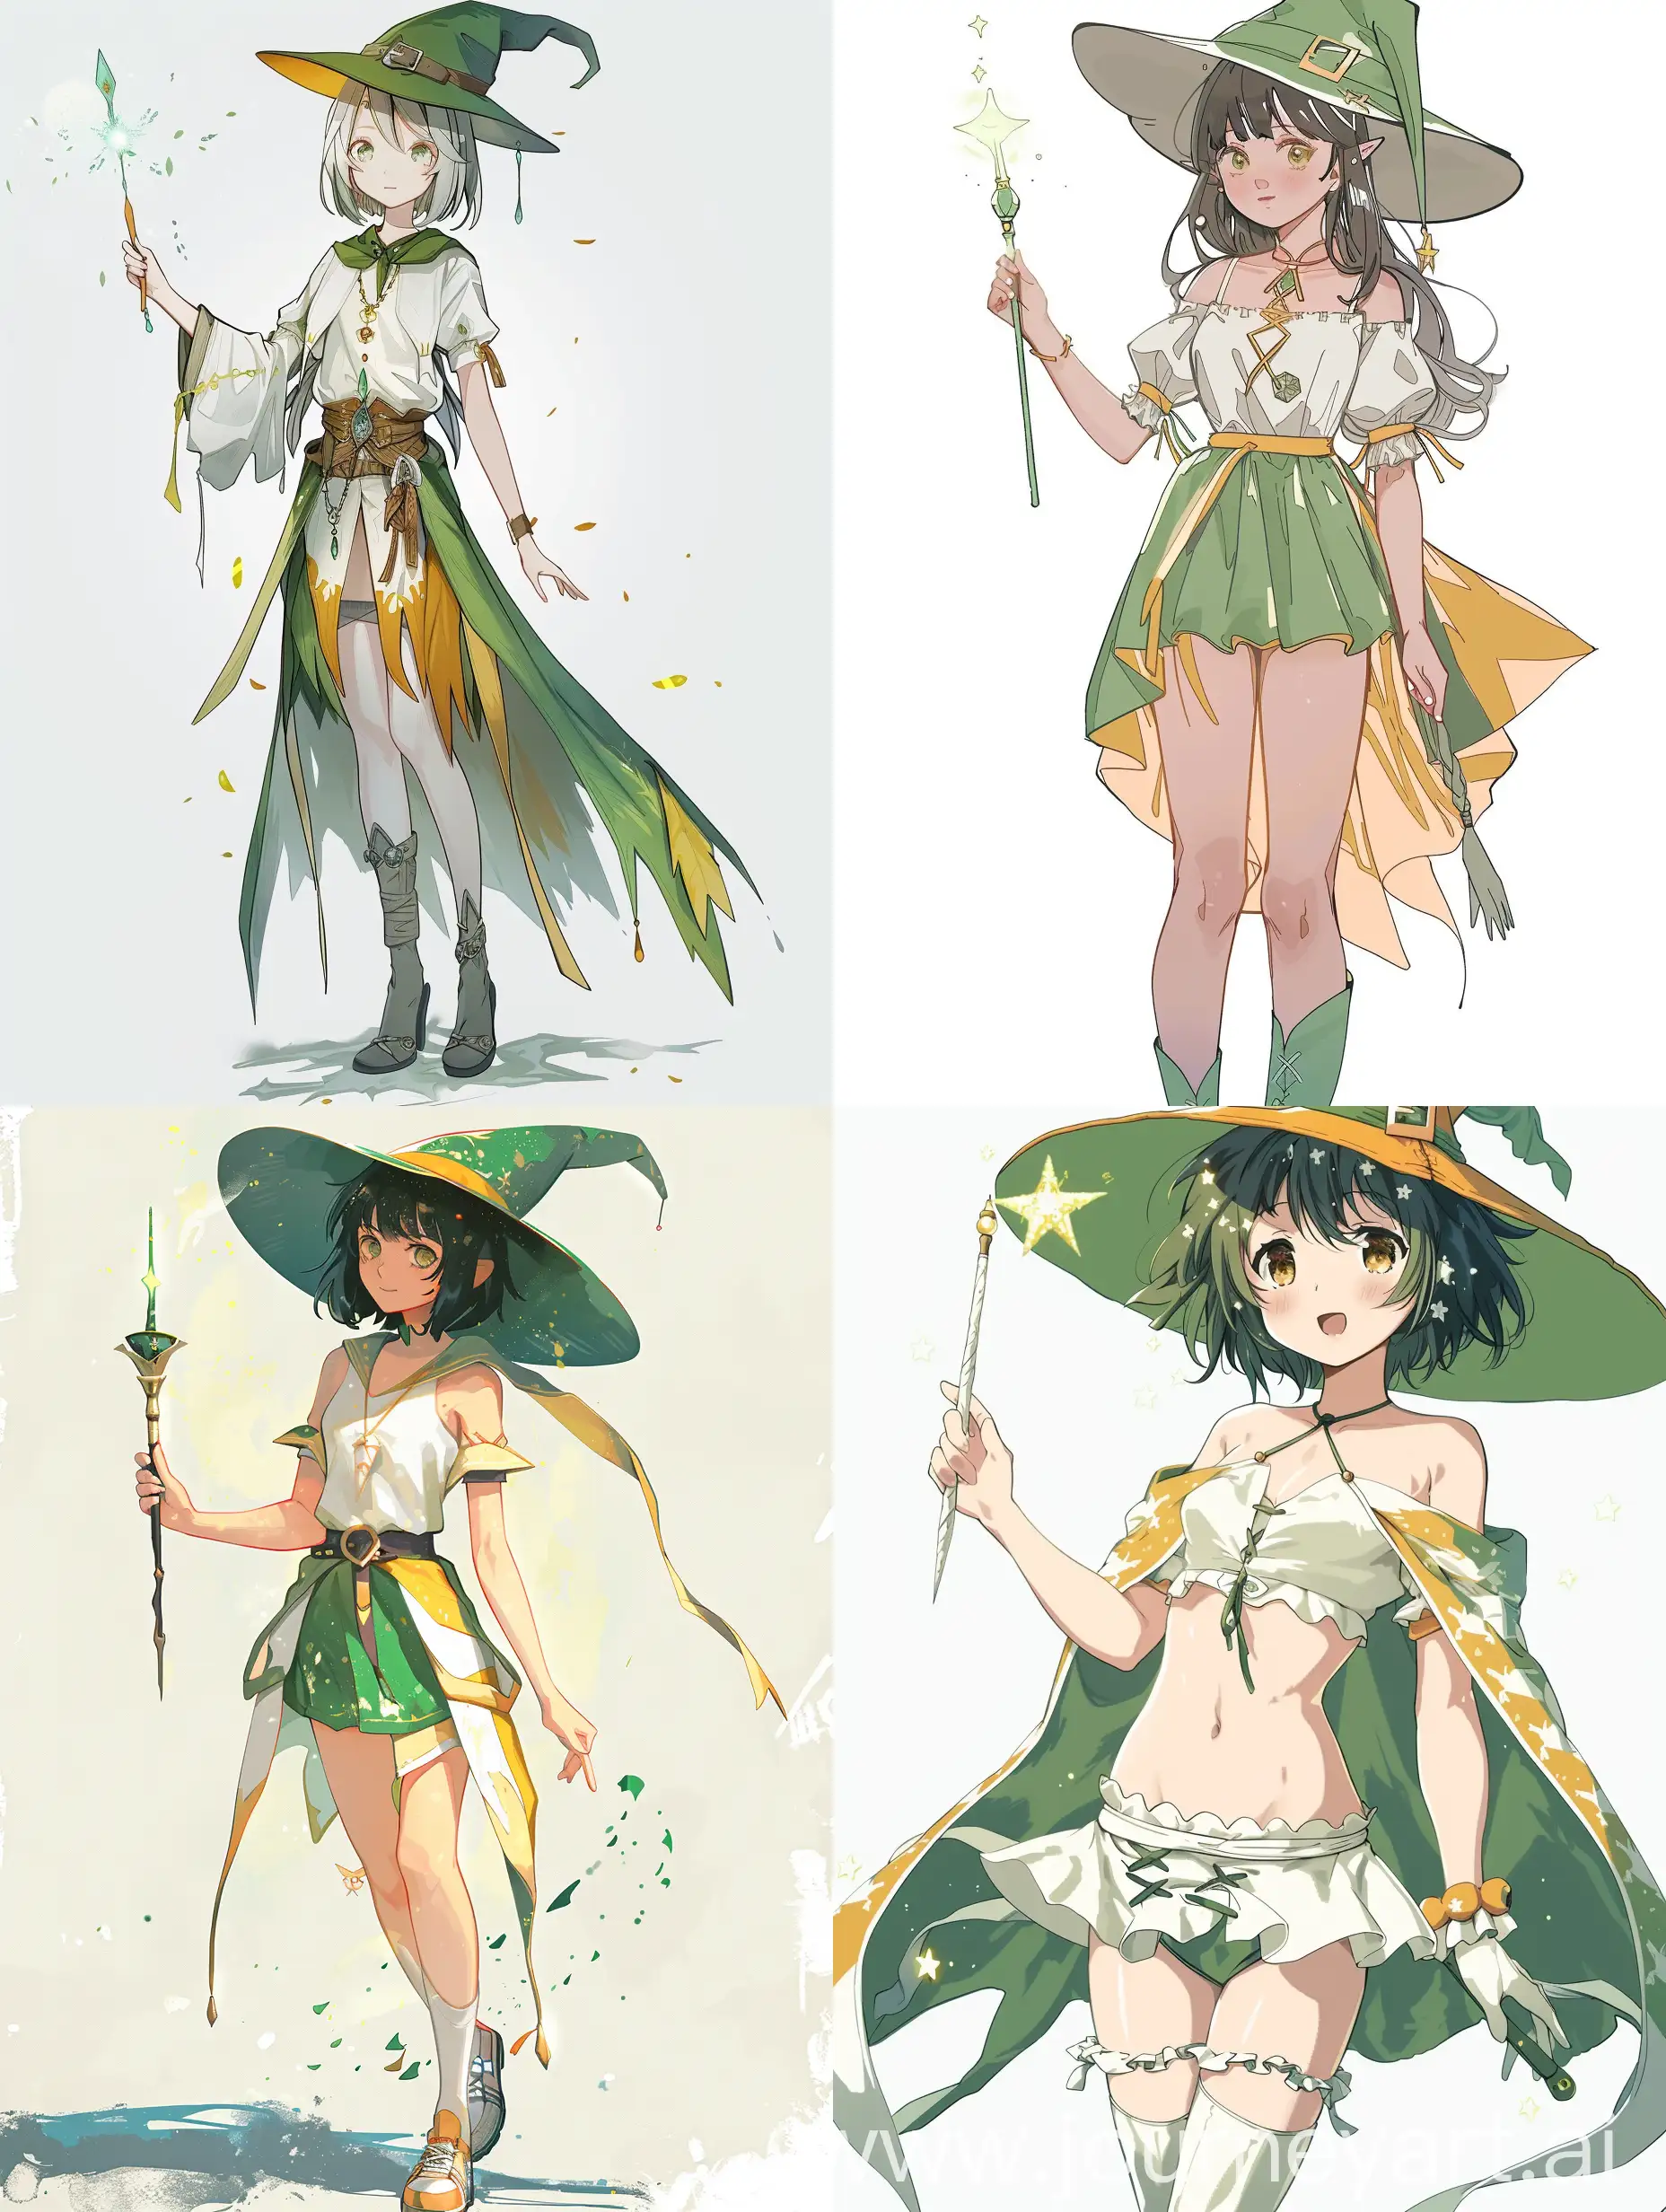 Anime-WitchInspired-Girl-with-Magic-Wand-in-Green-and-Yellow-Outfit